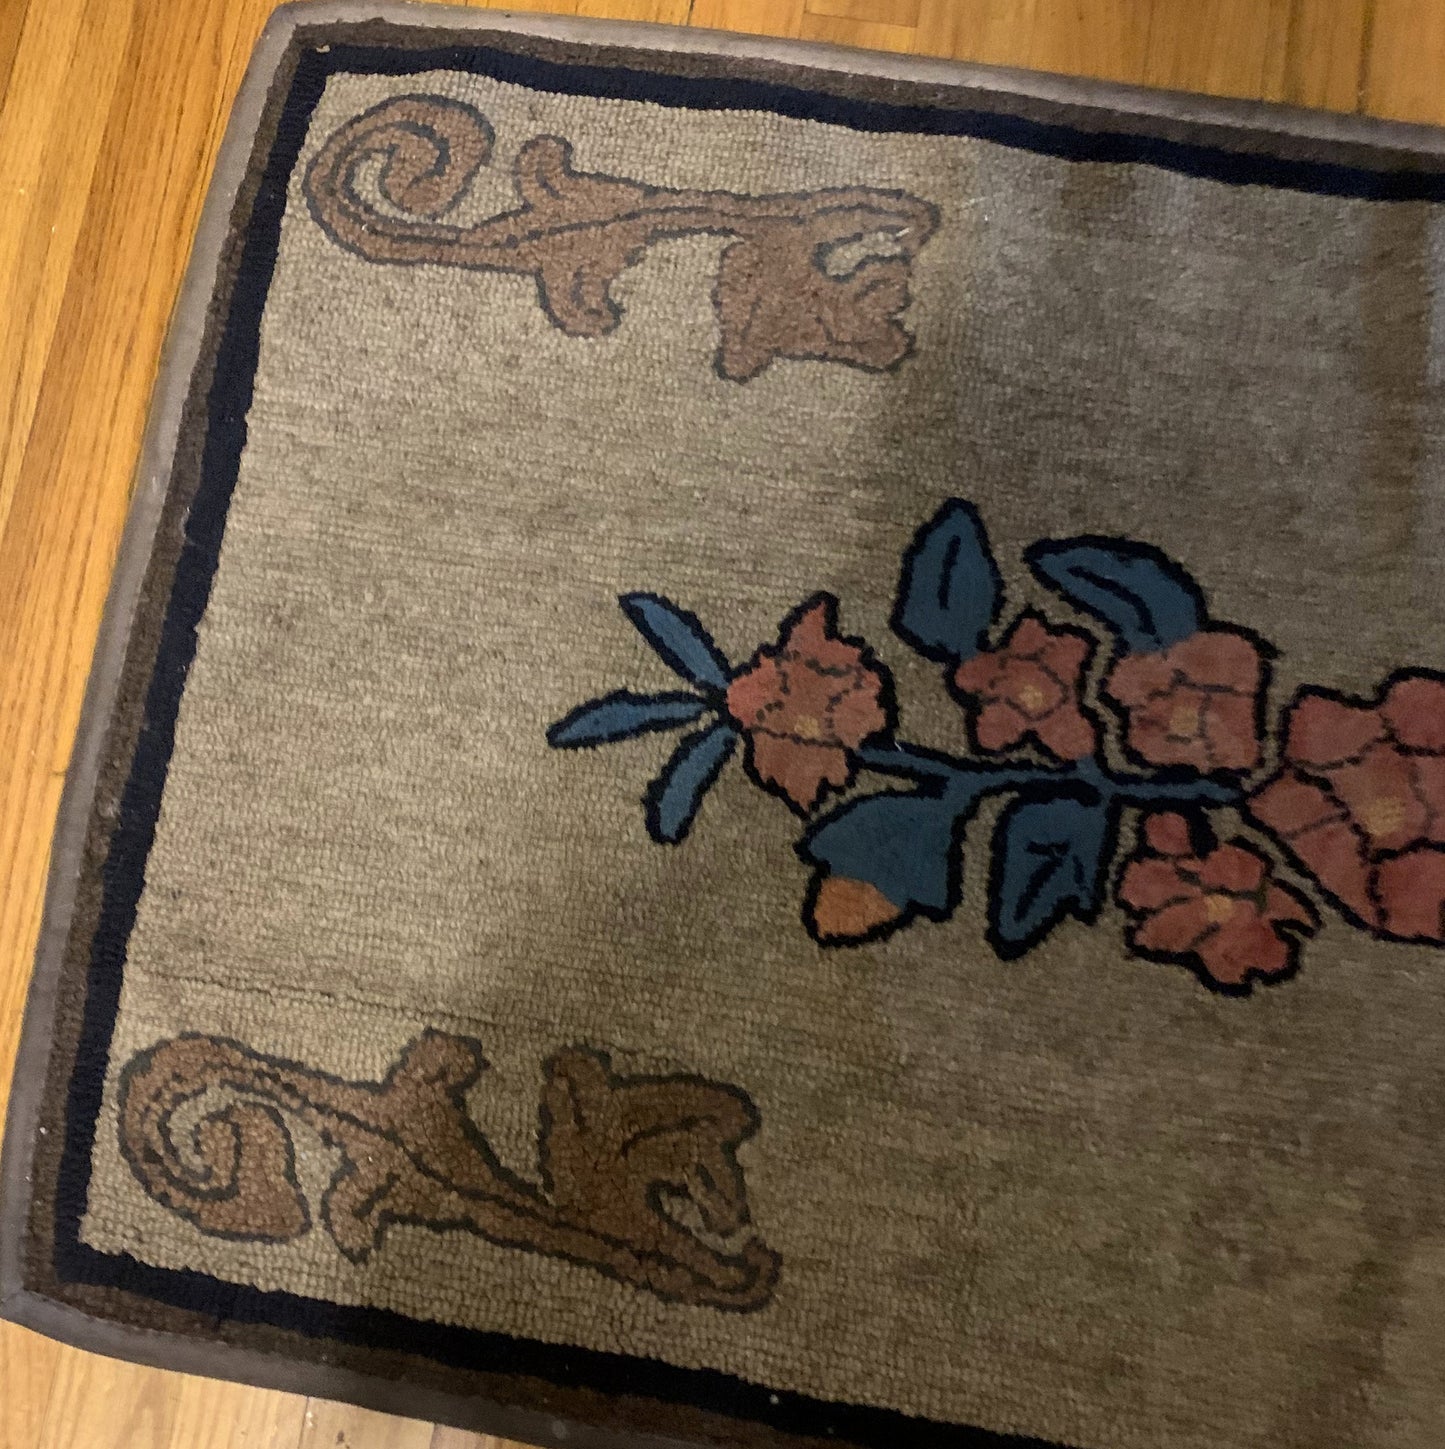 Handmade antique American Hooked rug in floral design. The rug is from the beginning of 20th century in original good condition. 